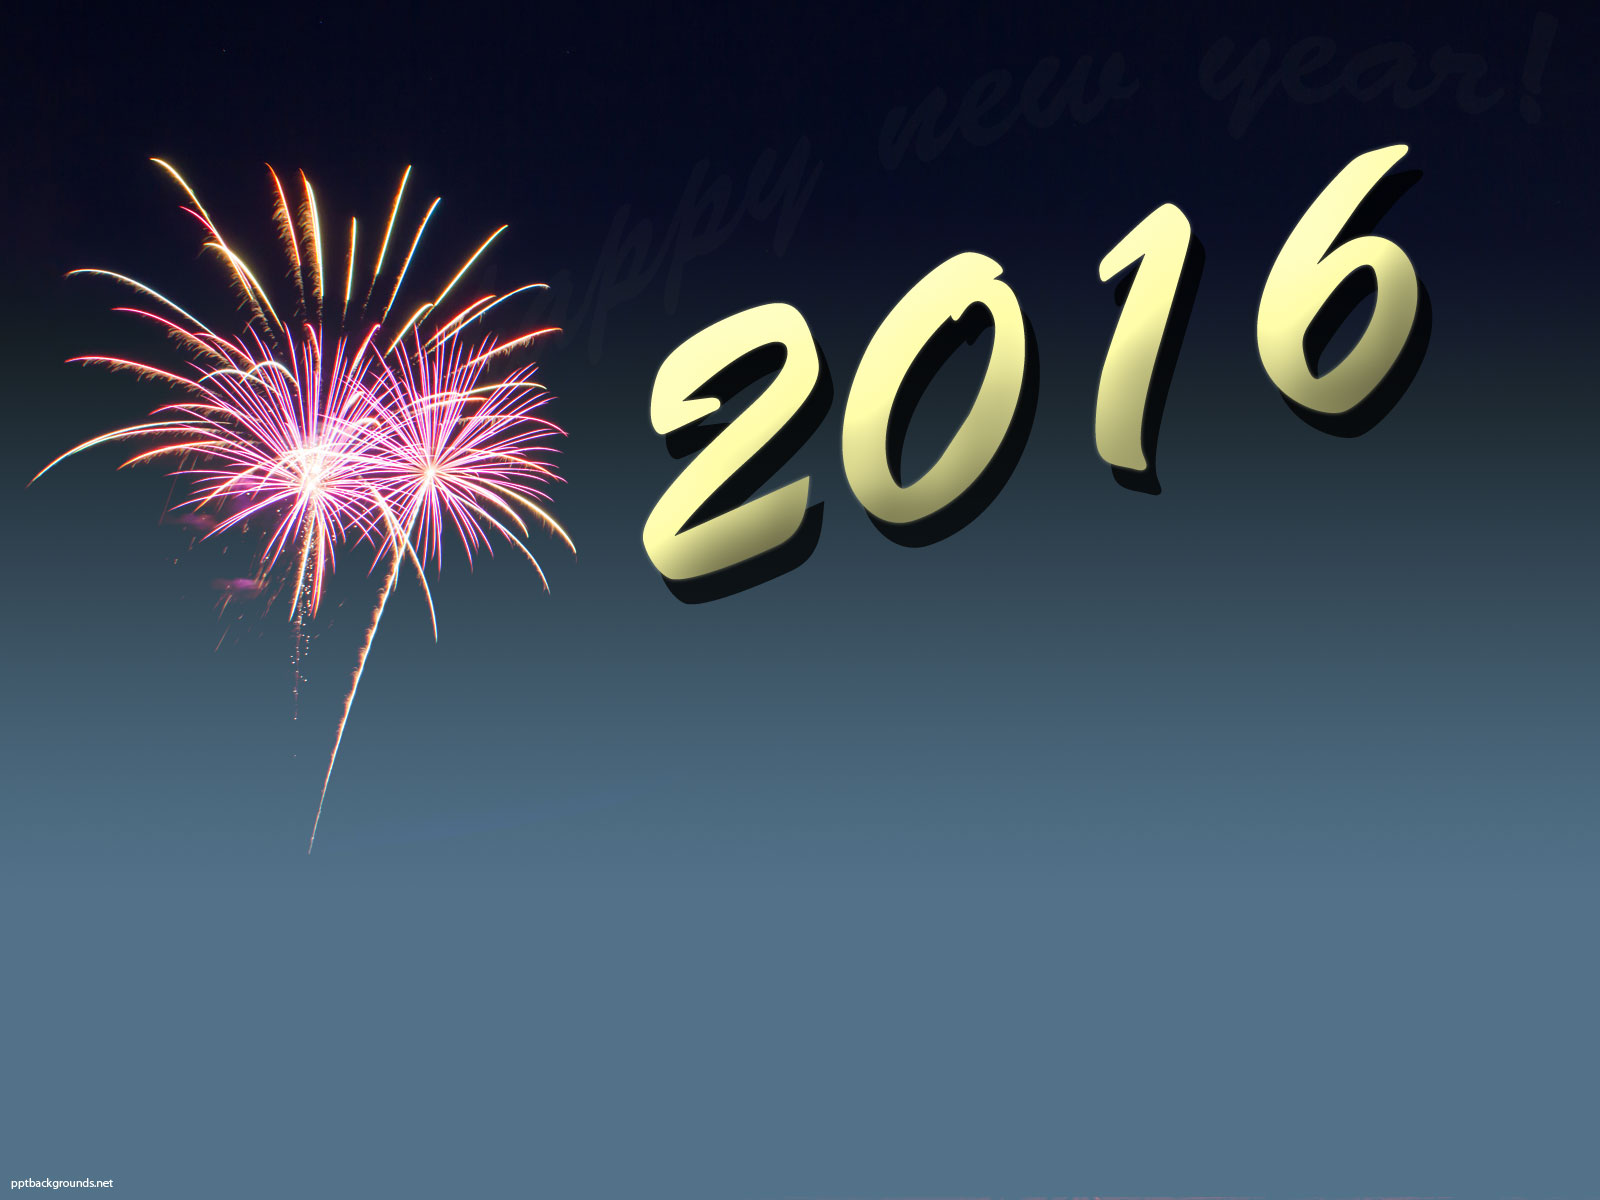 This Is The New Year Background Image You Can Use Powerpoint